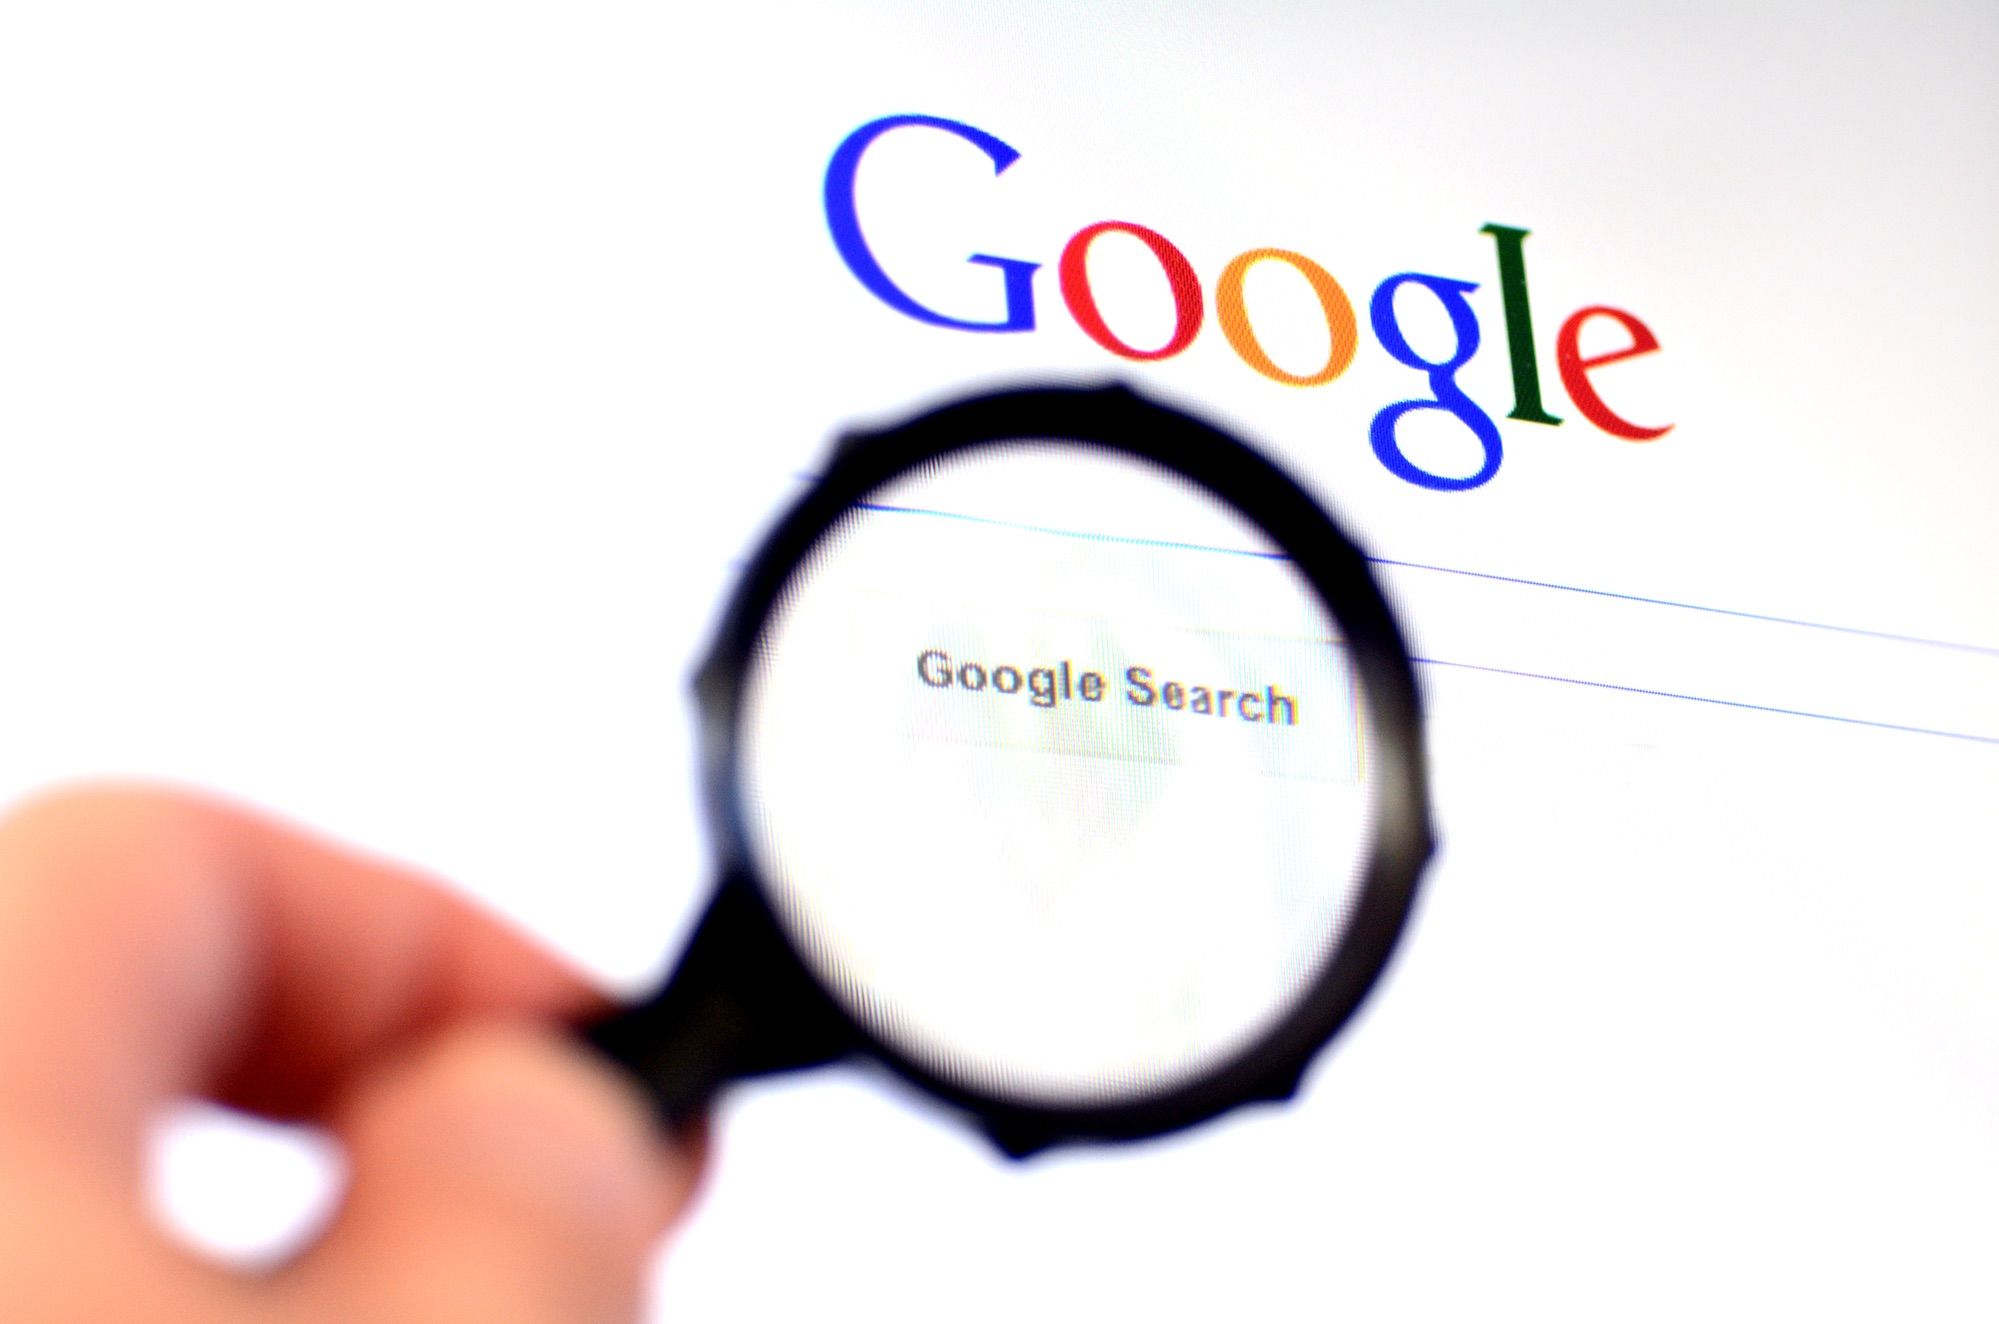 Google incognito search information tracking by Google privacy breach